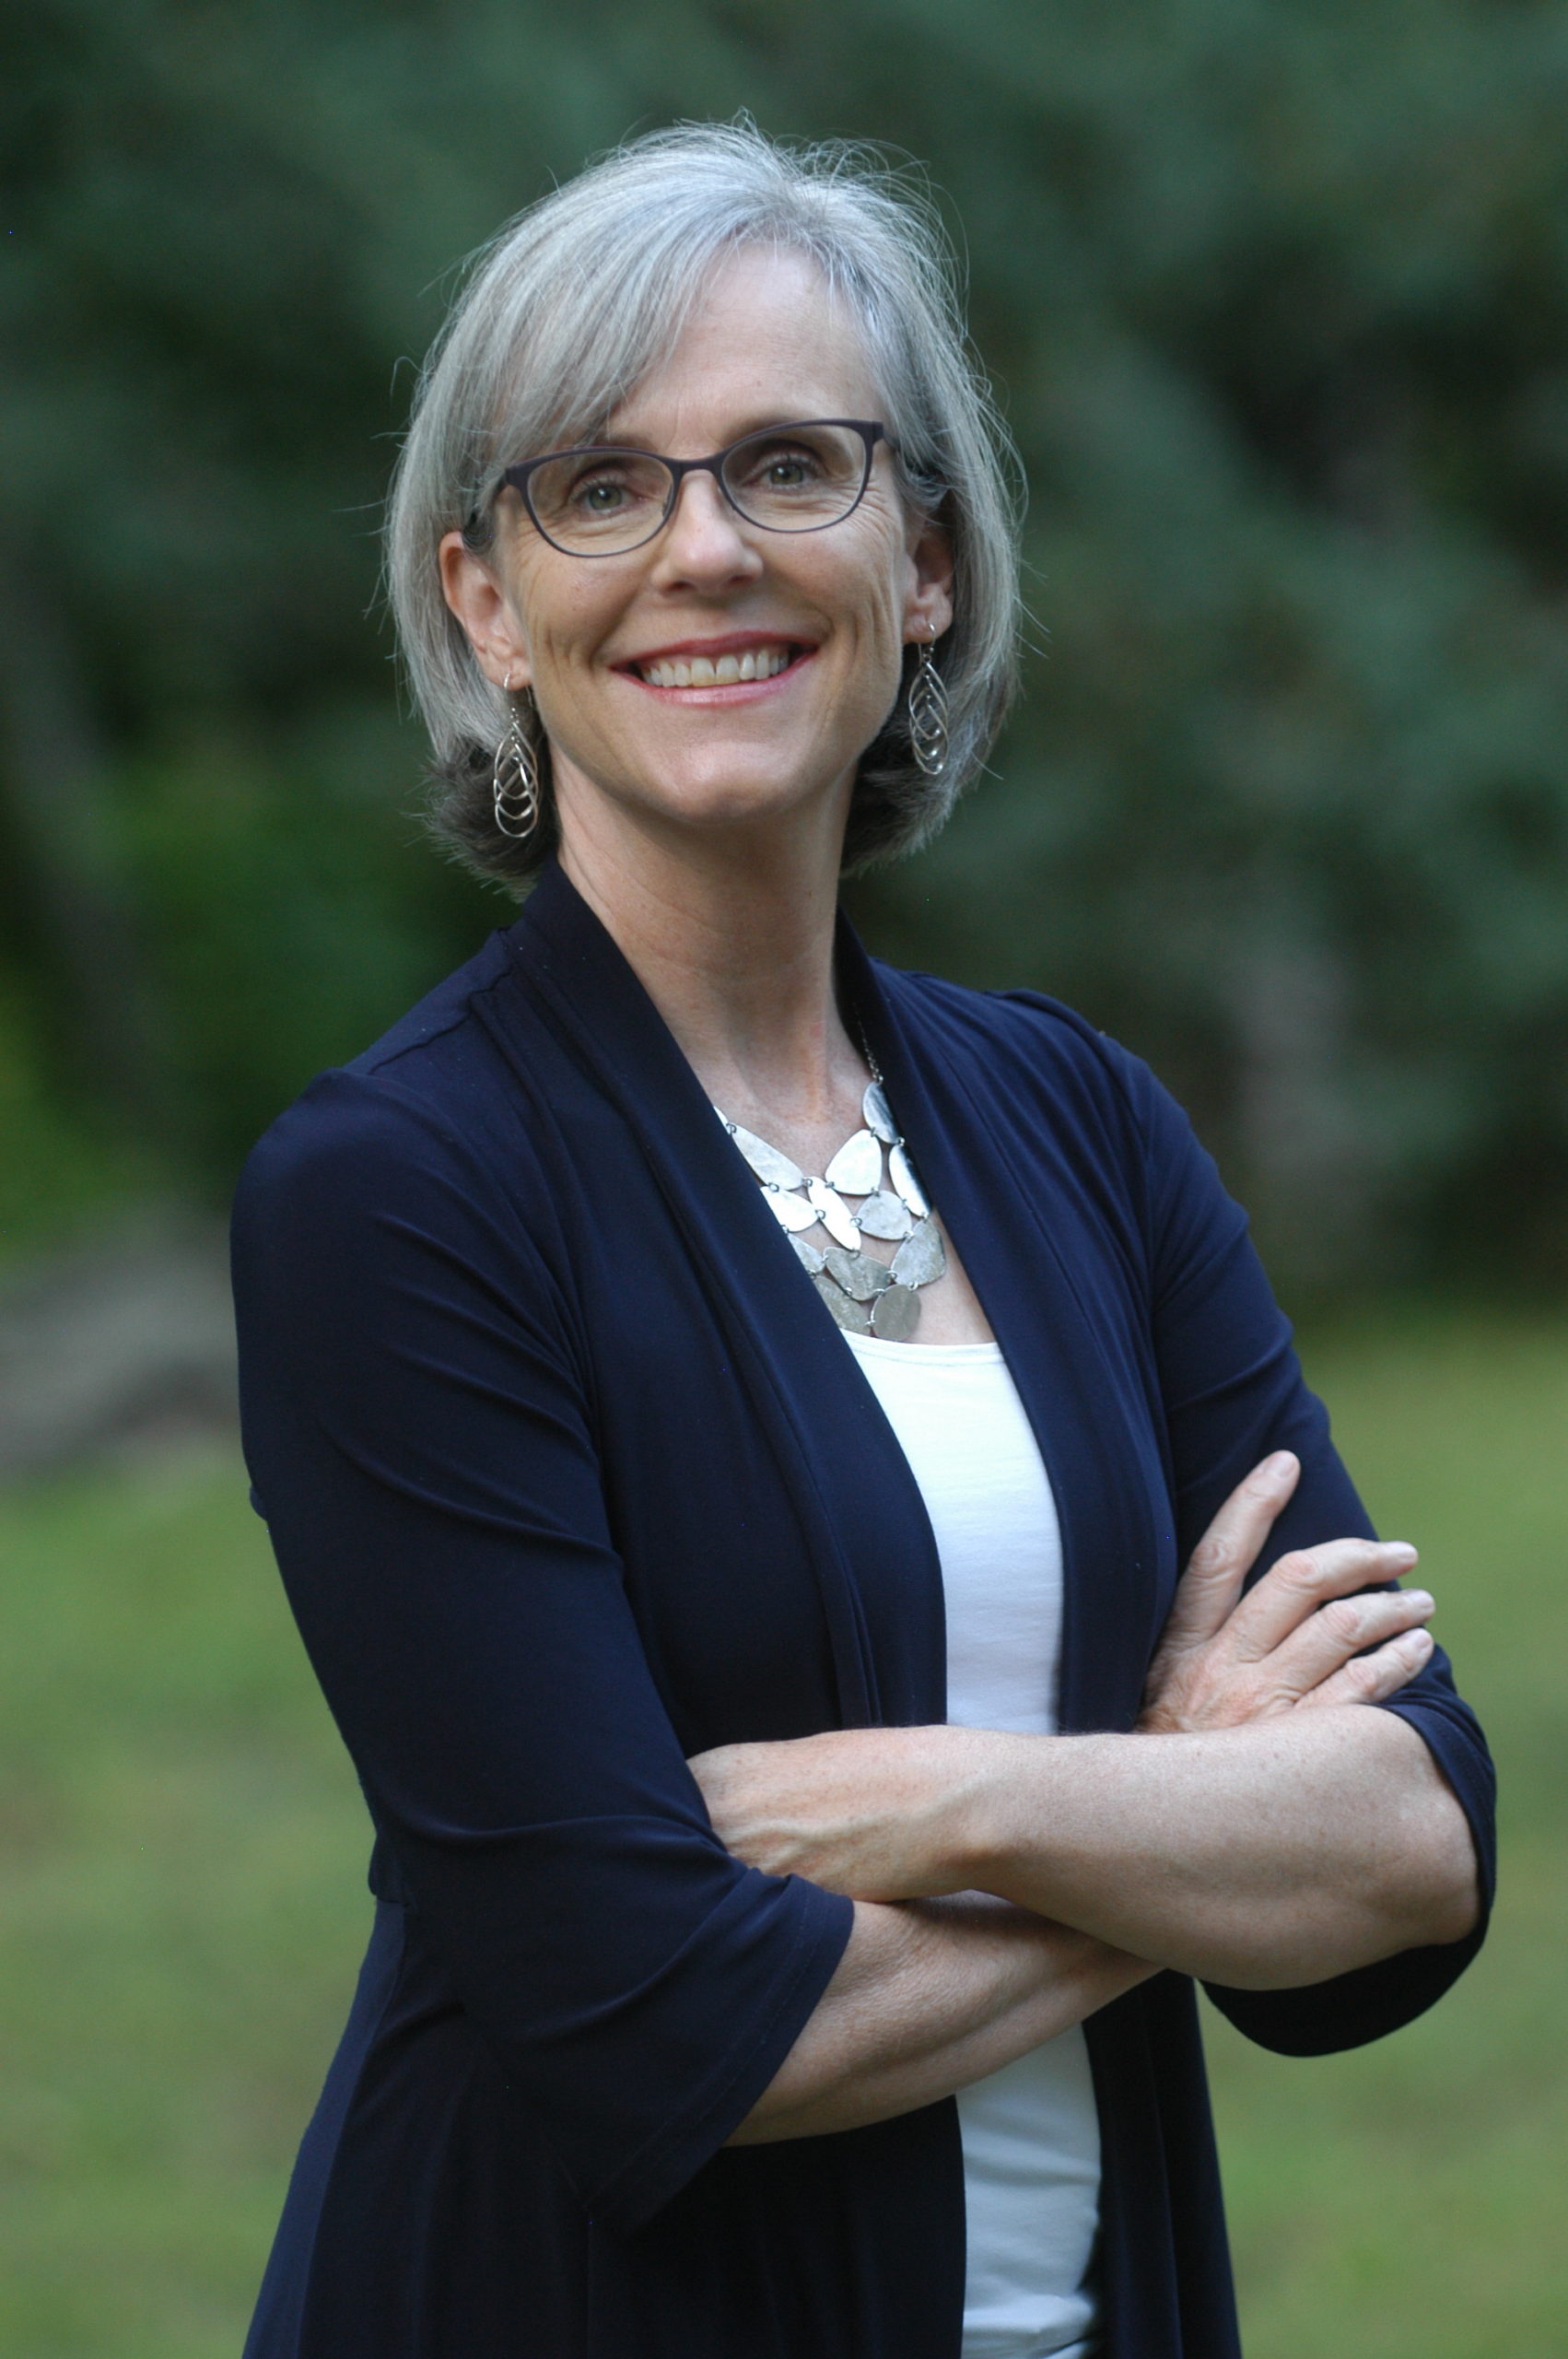 headshot Sage Wheeler, photo of white woman with gray bobbed hair, glasses and wearing silver earring and large silver necklace with navy cardigan and white tank top, standing outdoors